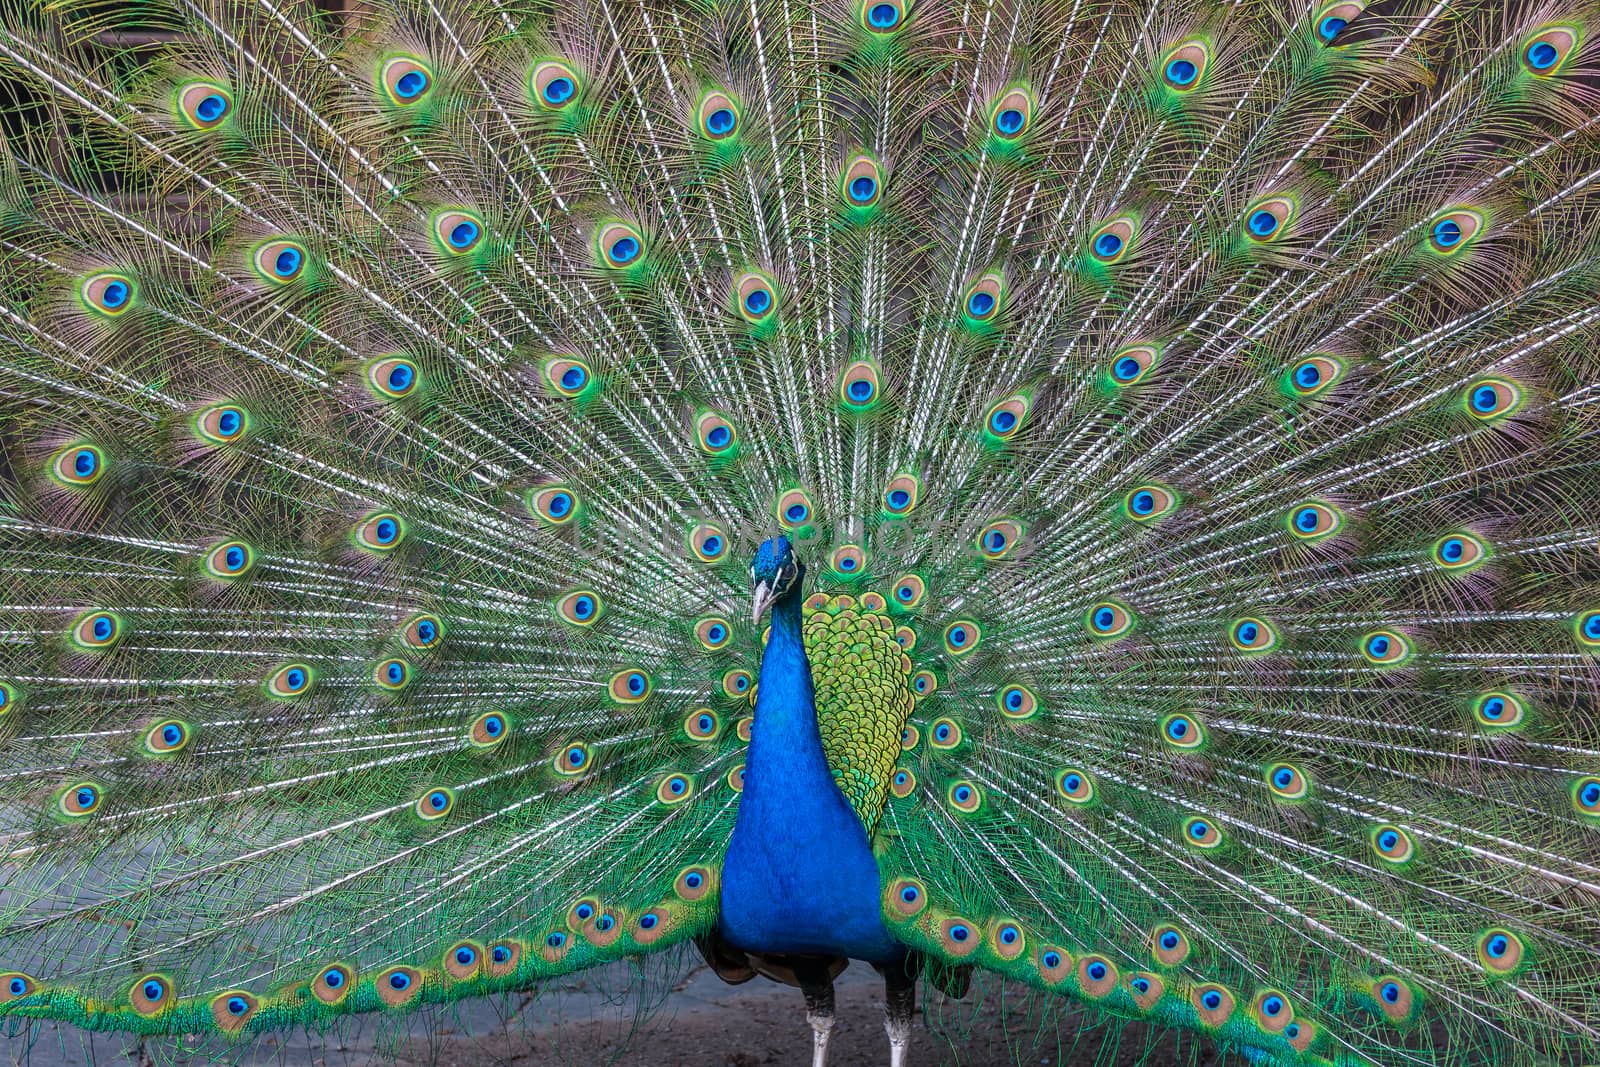 Peacock with multicolored feathers by master1305